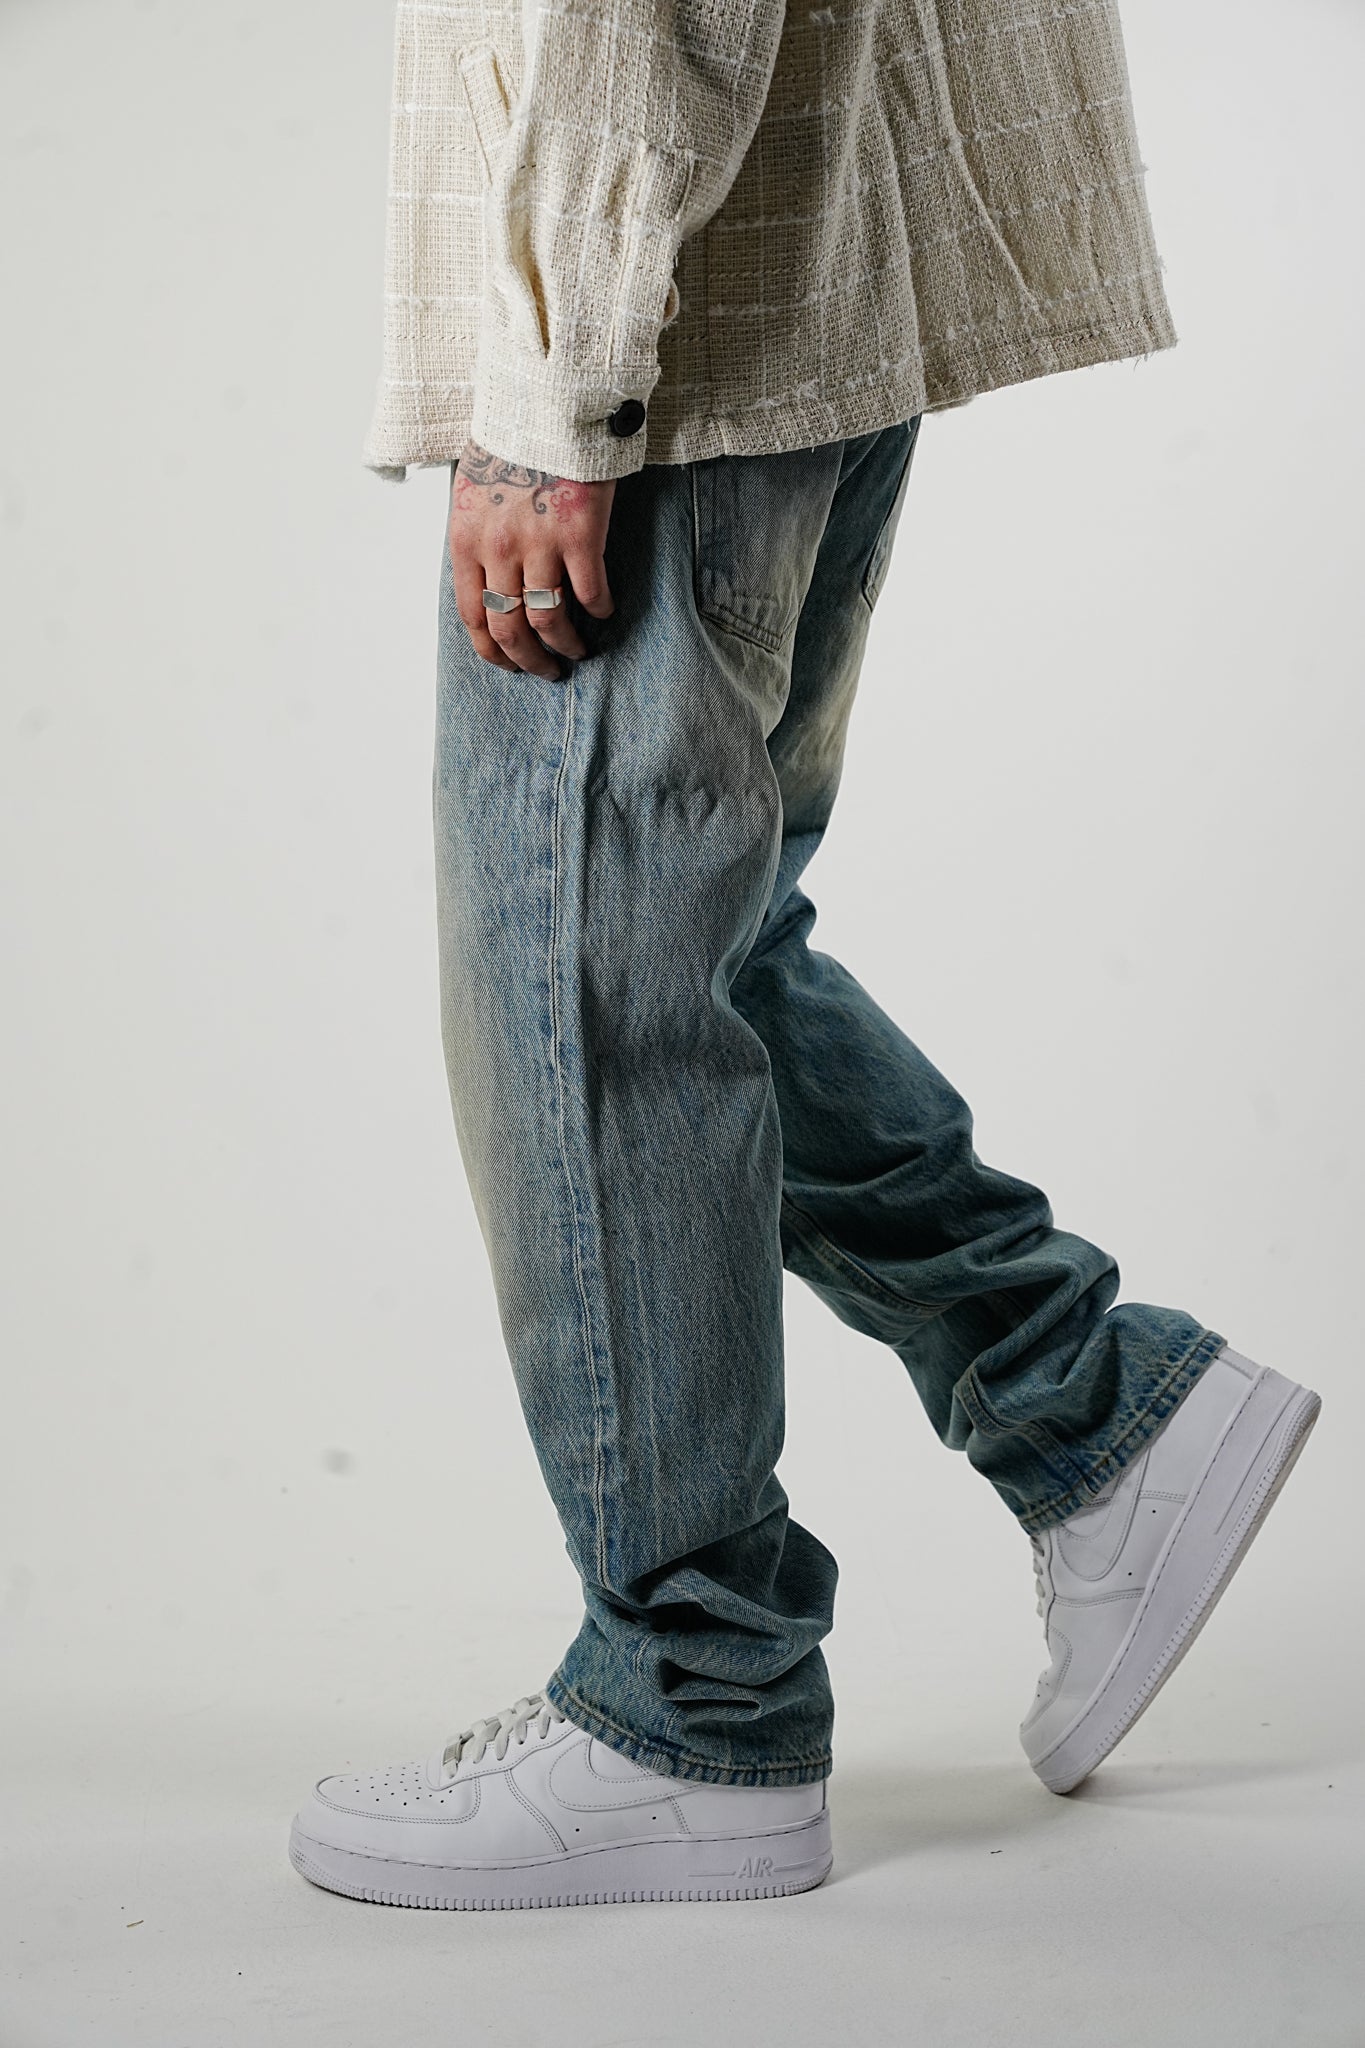 Premium Baggy Sand Washed Jeans - UNEFFECTED STUDIOS® - JEANS - UNEFFECTED STUDIOS®